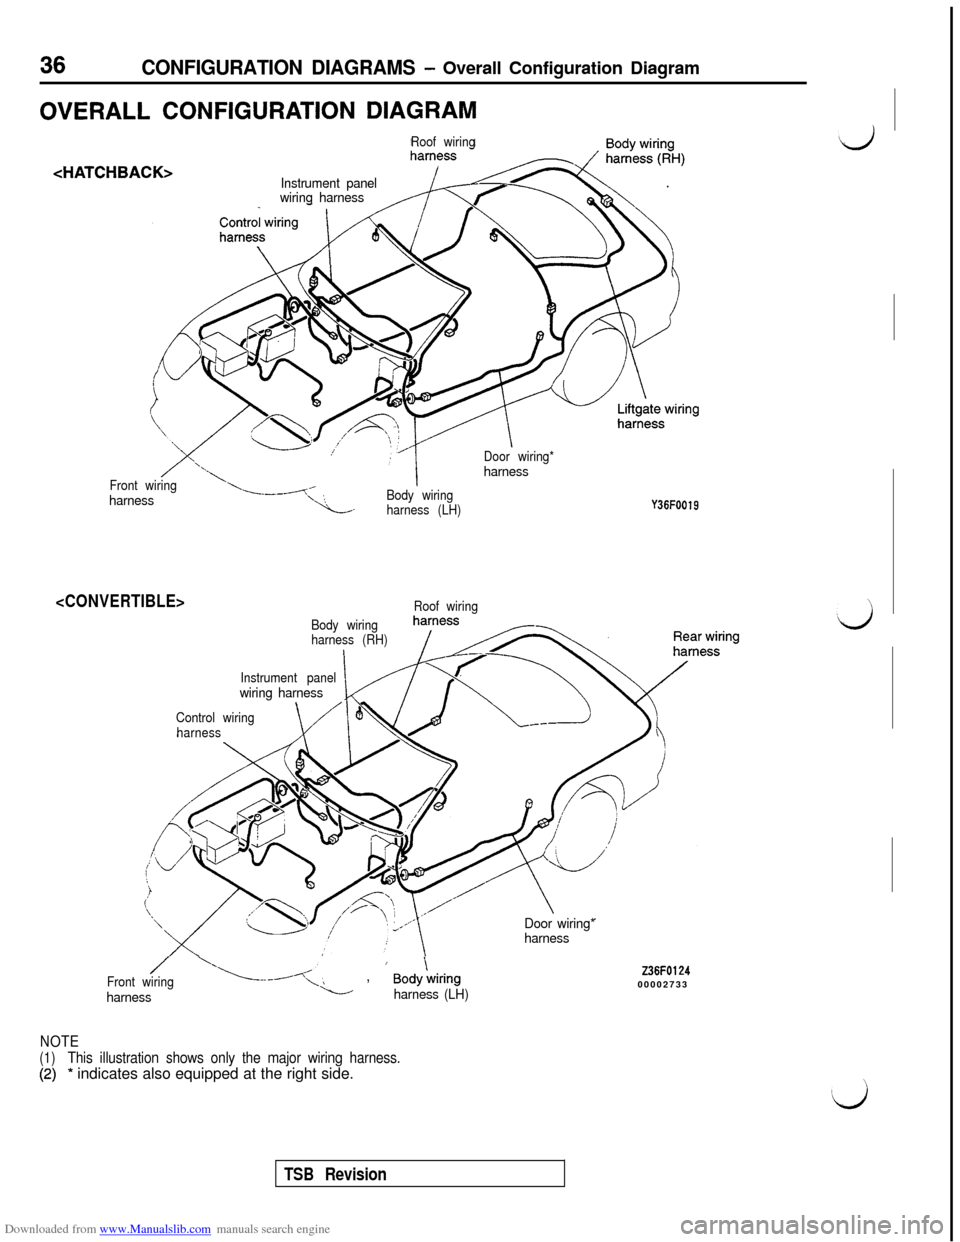 MITSUBISHI 3000GT 1996 2.G Owners Guide Downloaded from www.Manualslib.com manuals search engine 36CONFIGURATION DIAGRAMS - Overall Configuration Diagram
OVERALL CONFIGURATION DIAGRAM
<HAT1
Roof wiring
CHBACK>Instrument panel
wiring harness